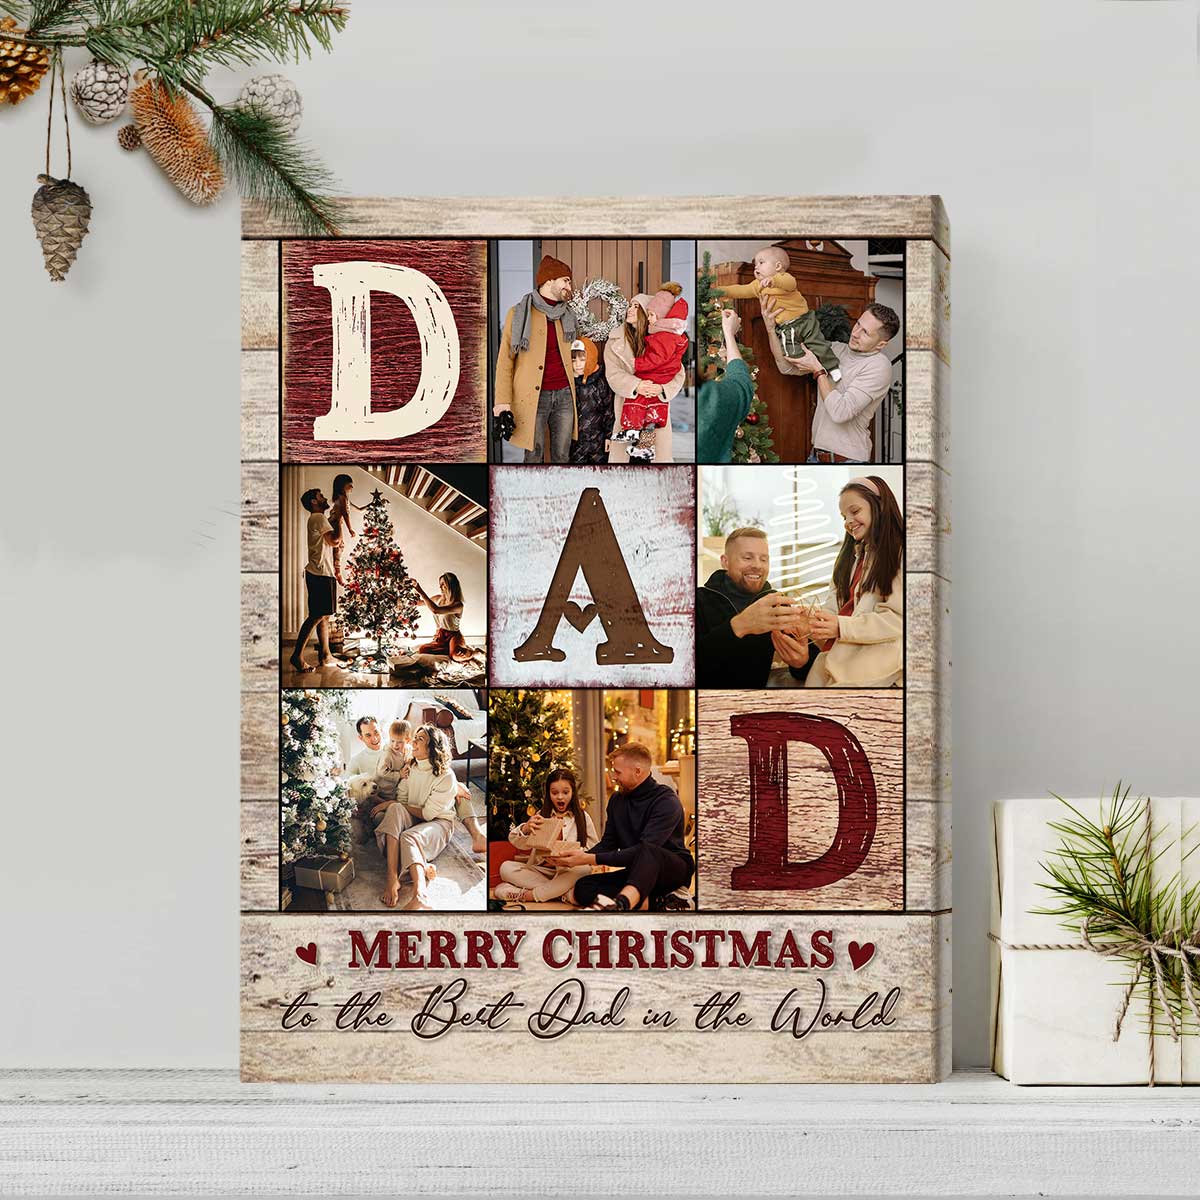 Why I Love My Daddy Book, Personalized Gift For Dad From Kids -Luhvee Books